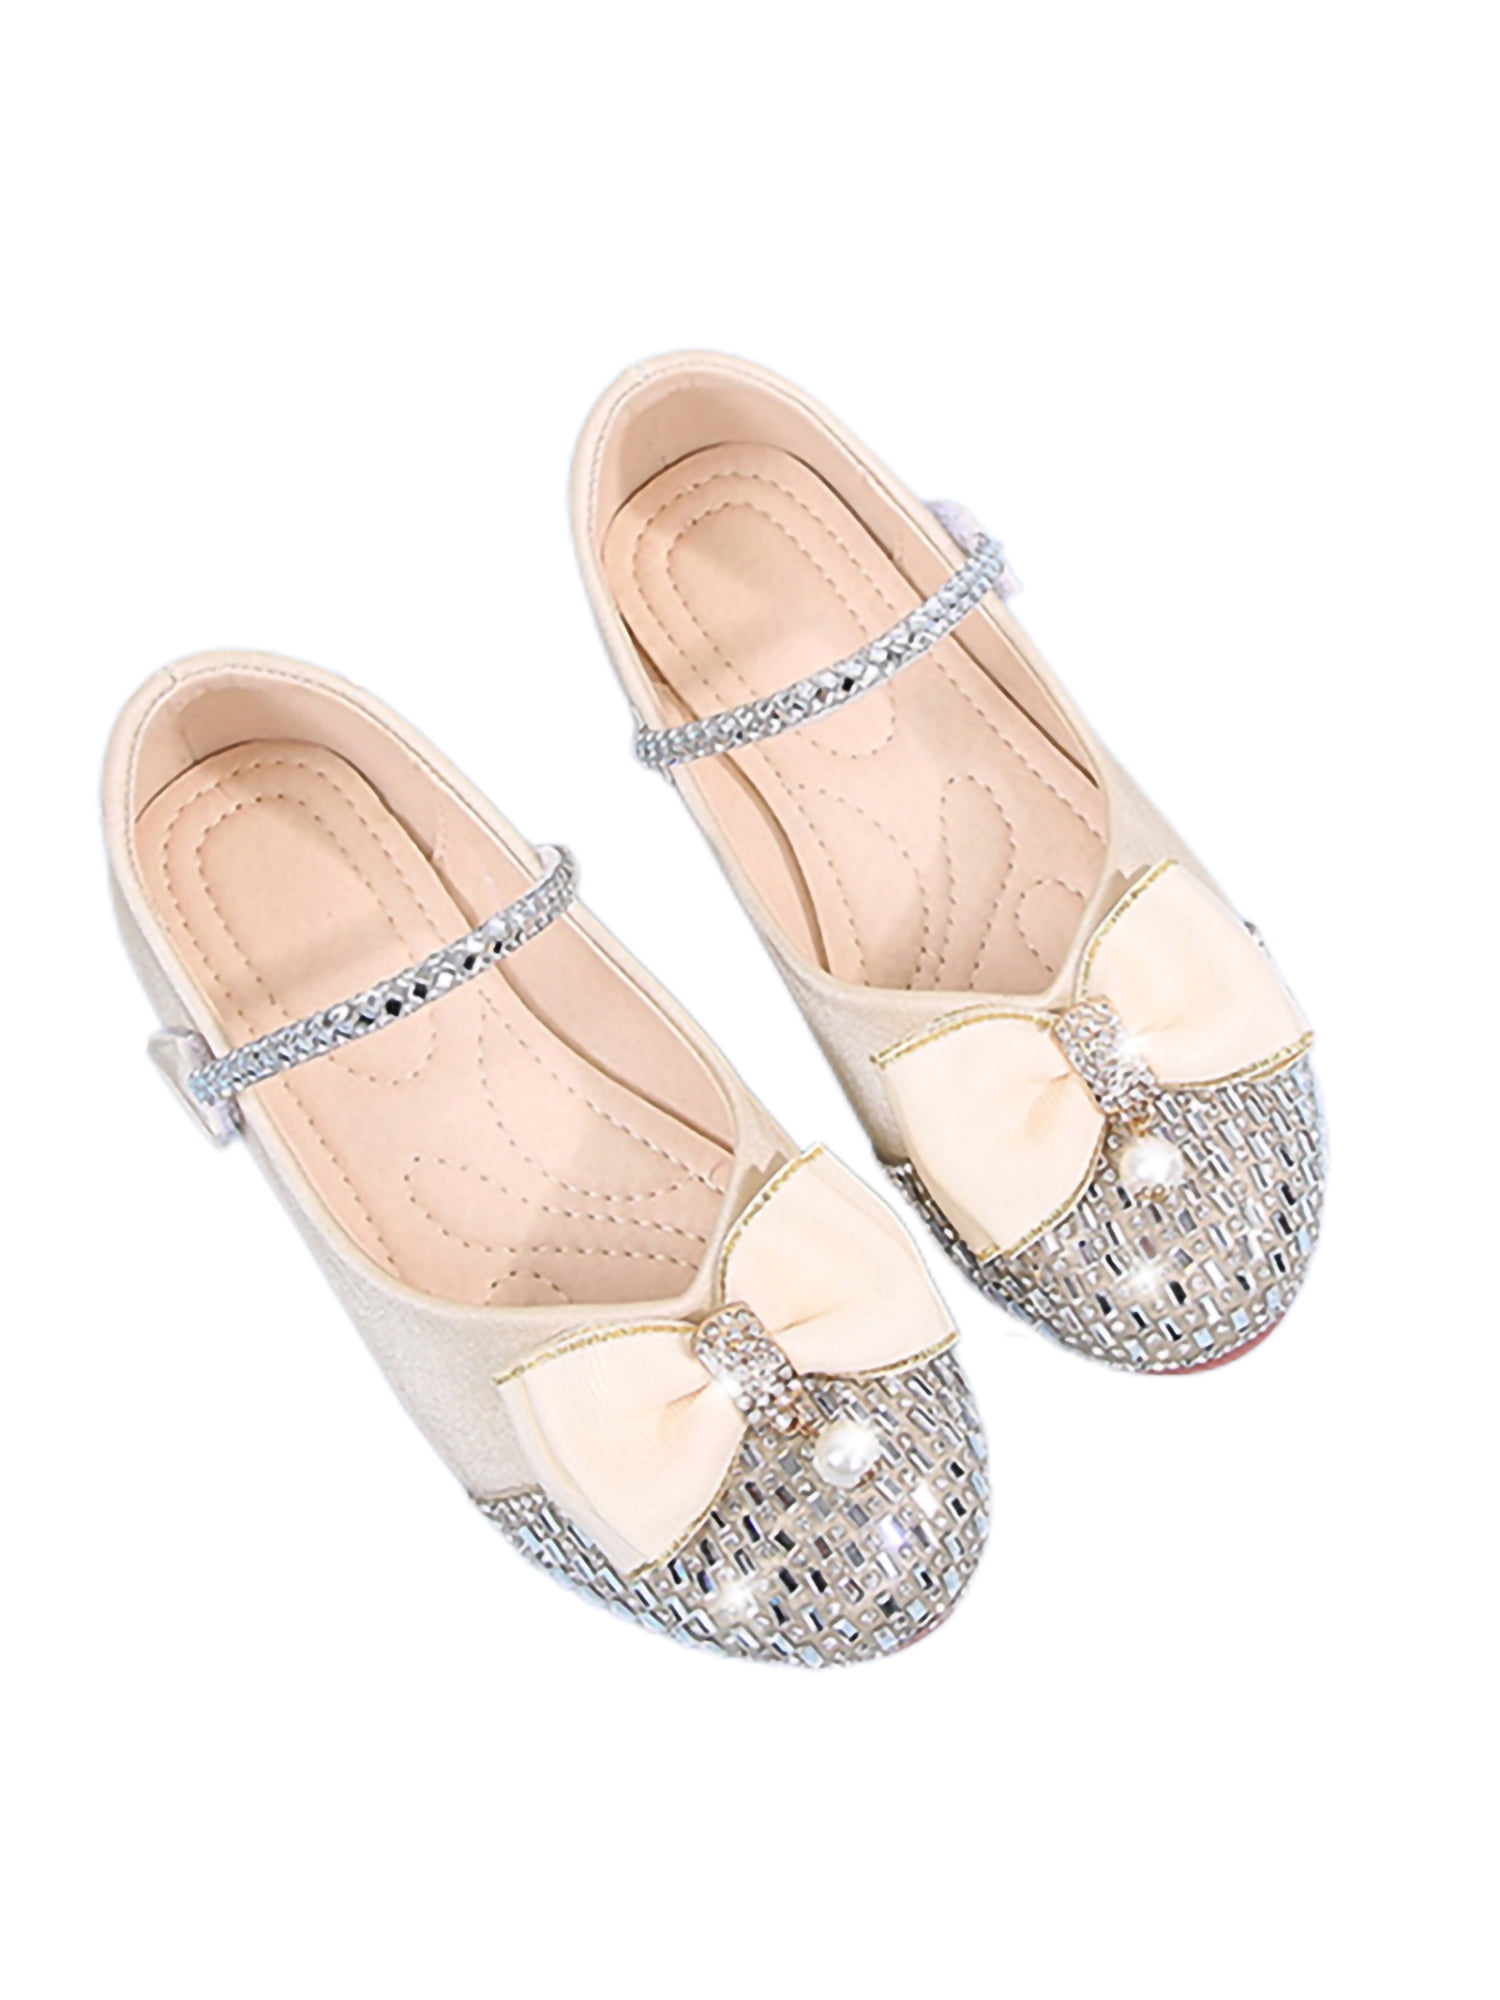 ADAMUMU Girls Dress Shoes Princess Mary Jane Shoes Slip on Casual Toddler Girl Ballet Flats with Bowknot Flower Elastic Band in Party Wedding Dress Up Costume 